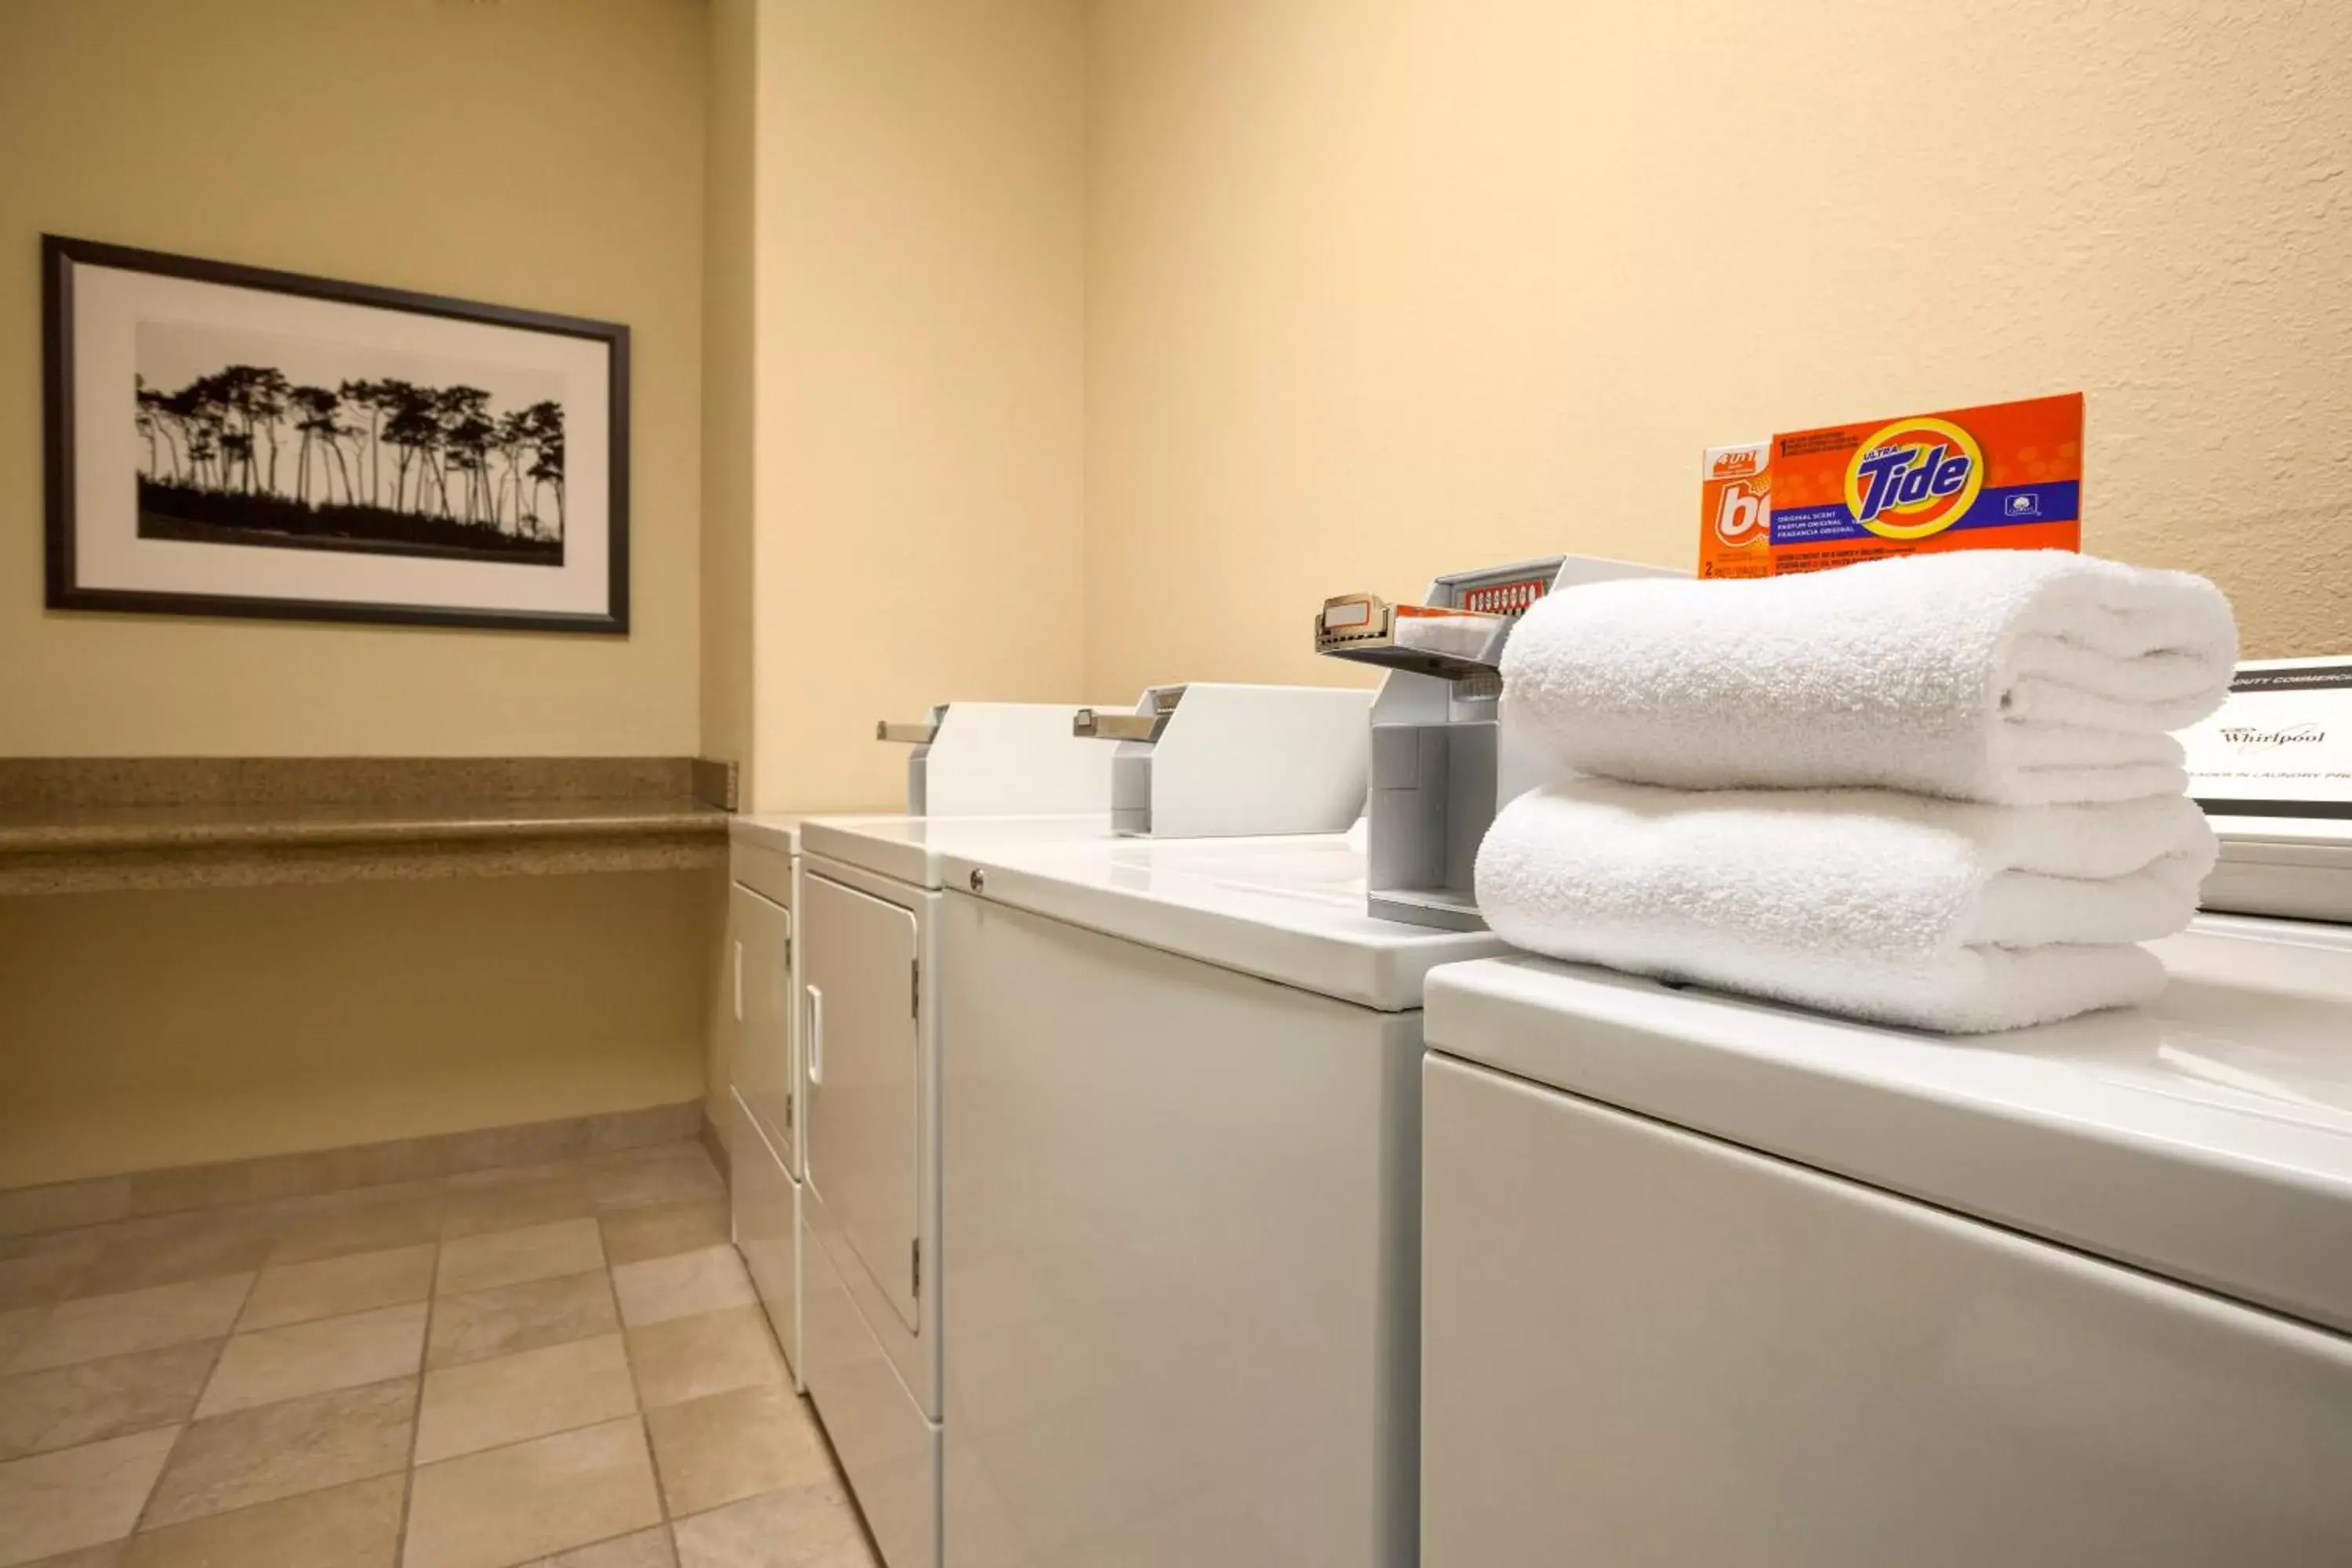 Area and facilities in Country Inn & Suites by Radisson, Smithfield-Selma, NC